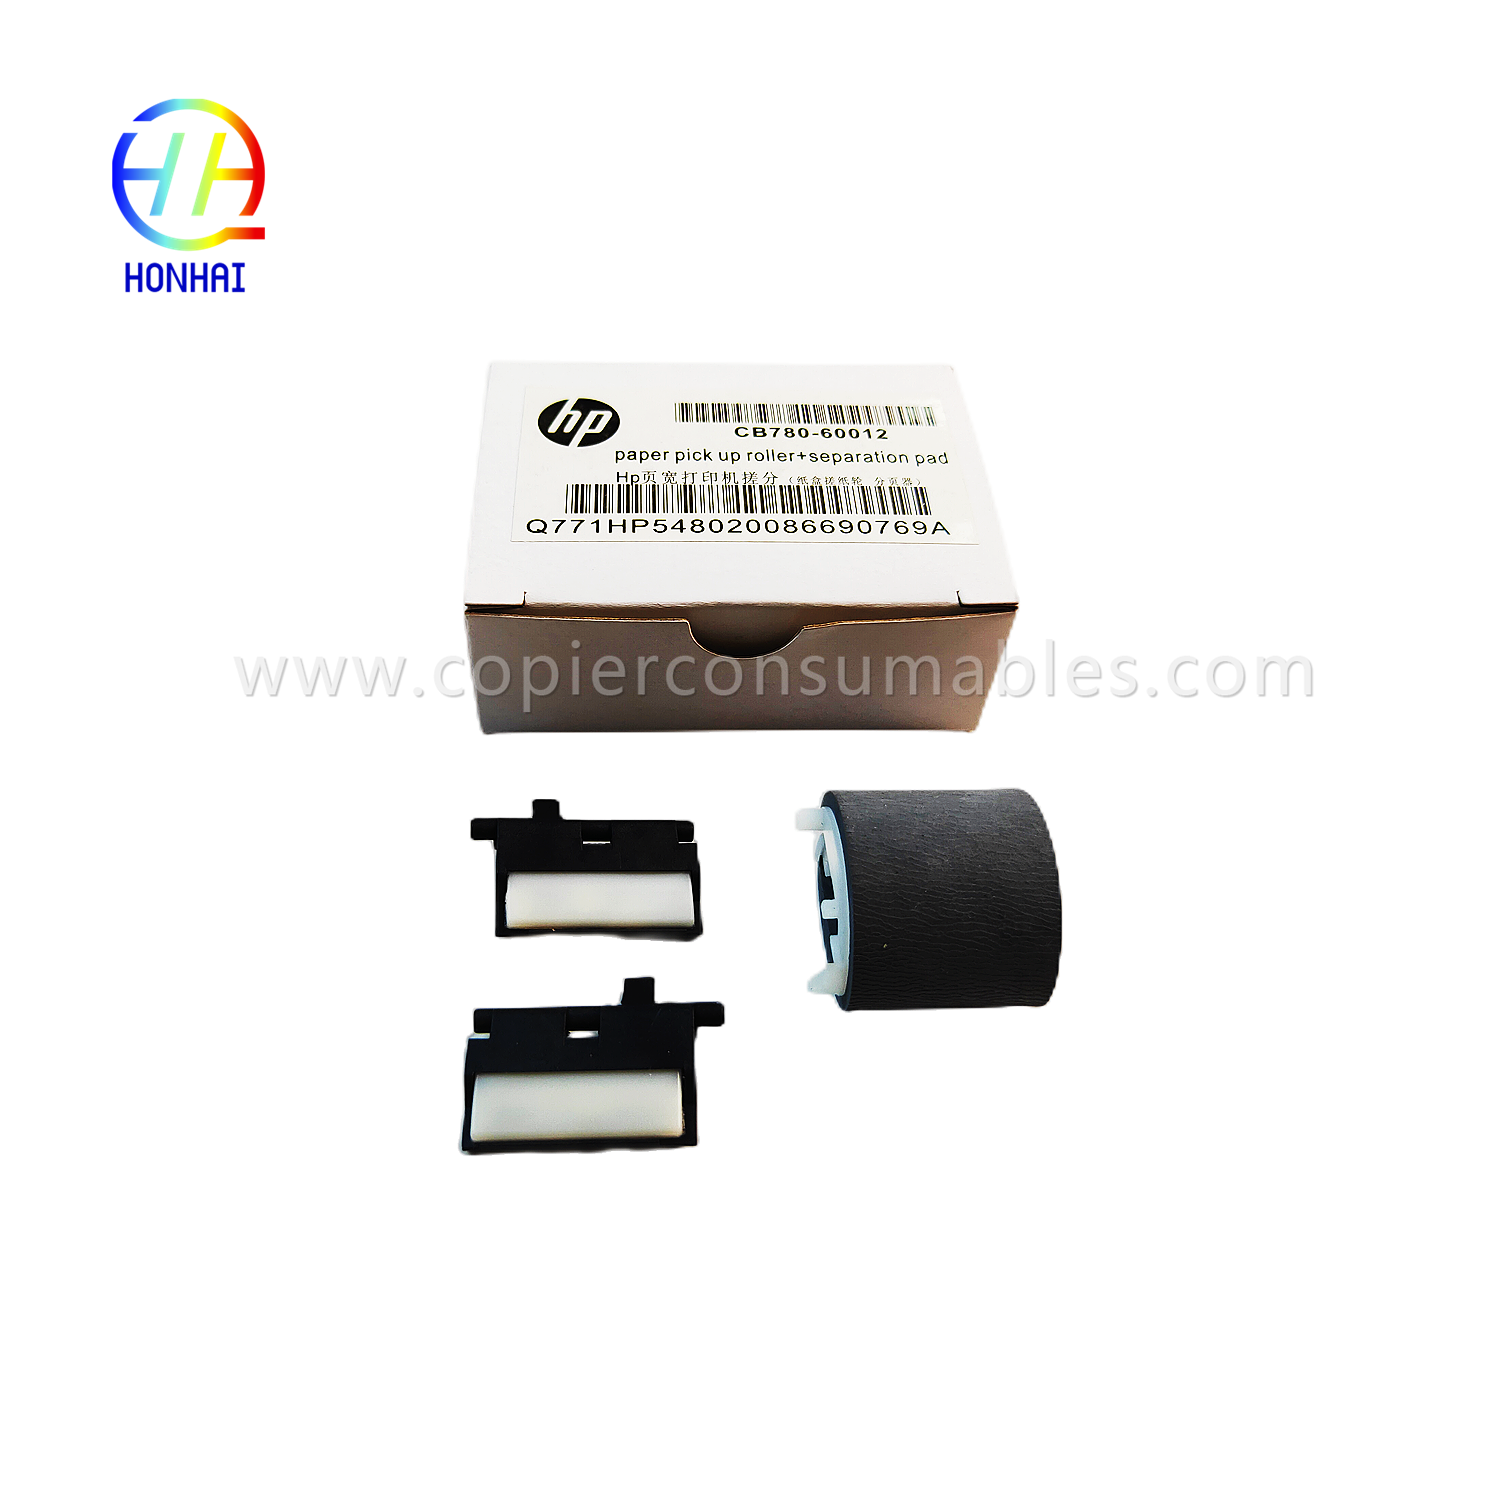 https://www.copierconsumables.com/paper-pickup-roller-separates-pad%ef%bc%88set%ef%bc%89for-hp-pagewide-x585z-x451dn-x476dn-x551dw-x576dw-556dn-586- 452dn-477dn-552-577z-cb780-60012-produkto/